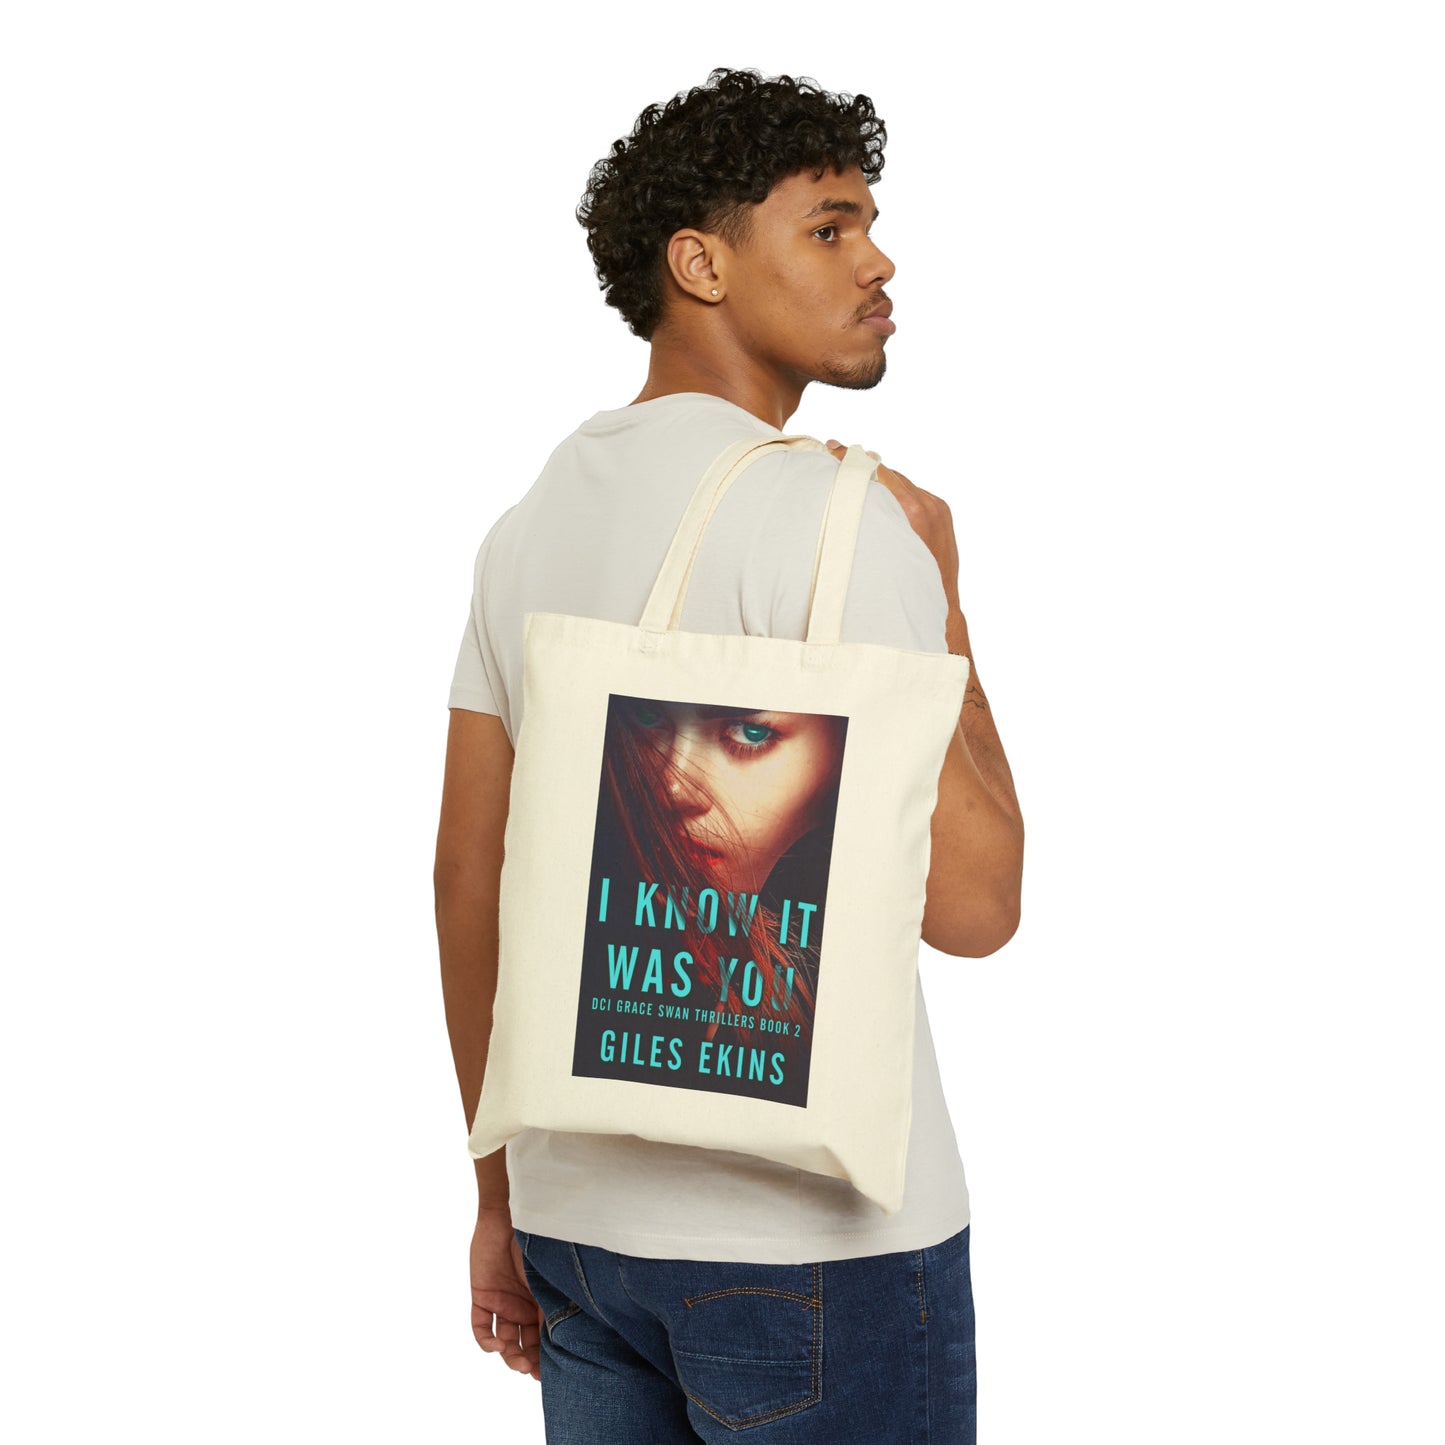 I Know It Was You - Cotton Canvas Tote Bag